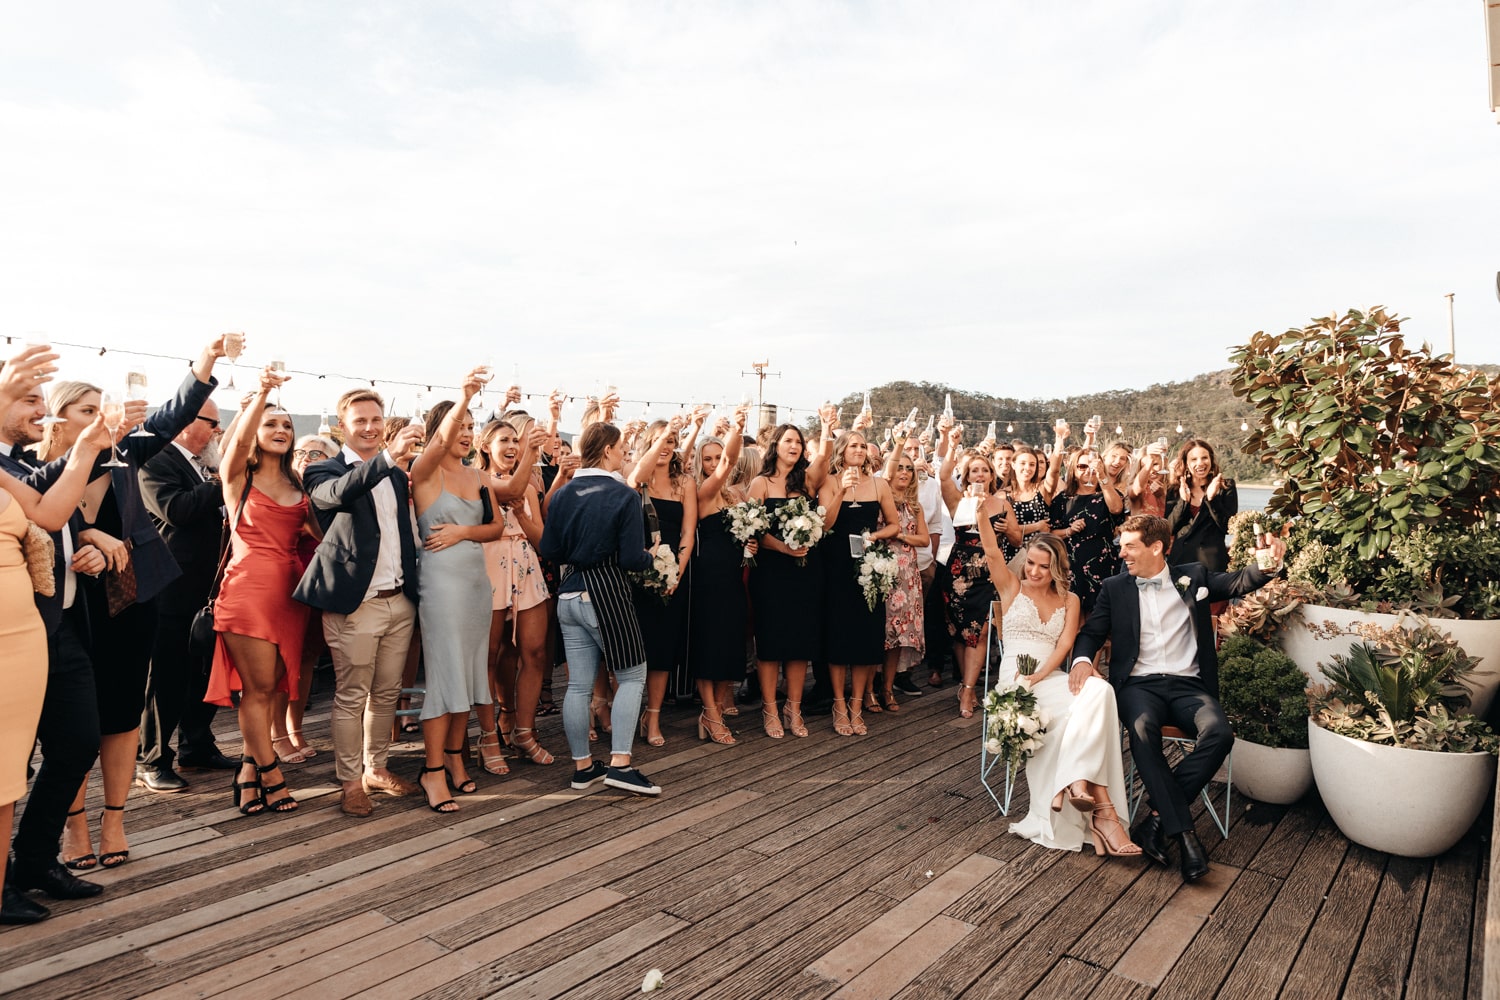 guests raising a glass for a toast - palm beach wedding